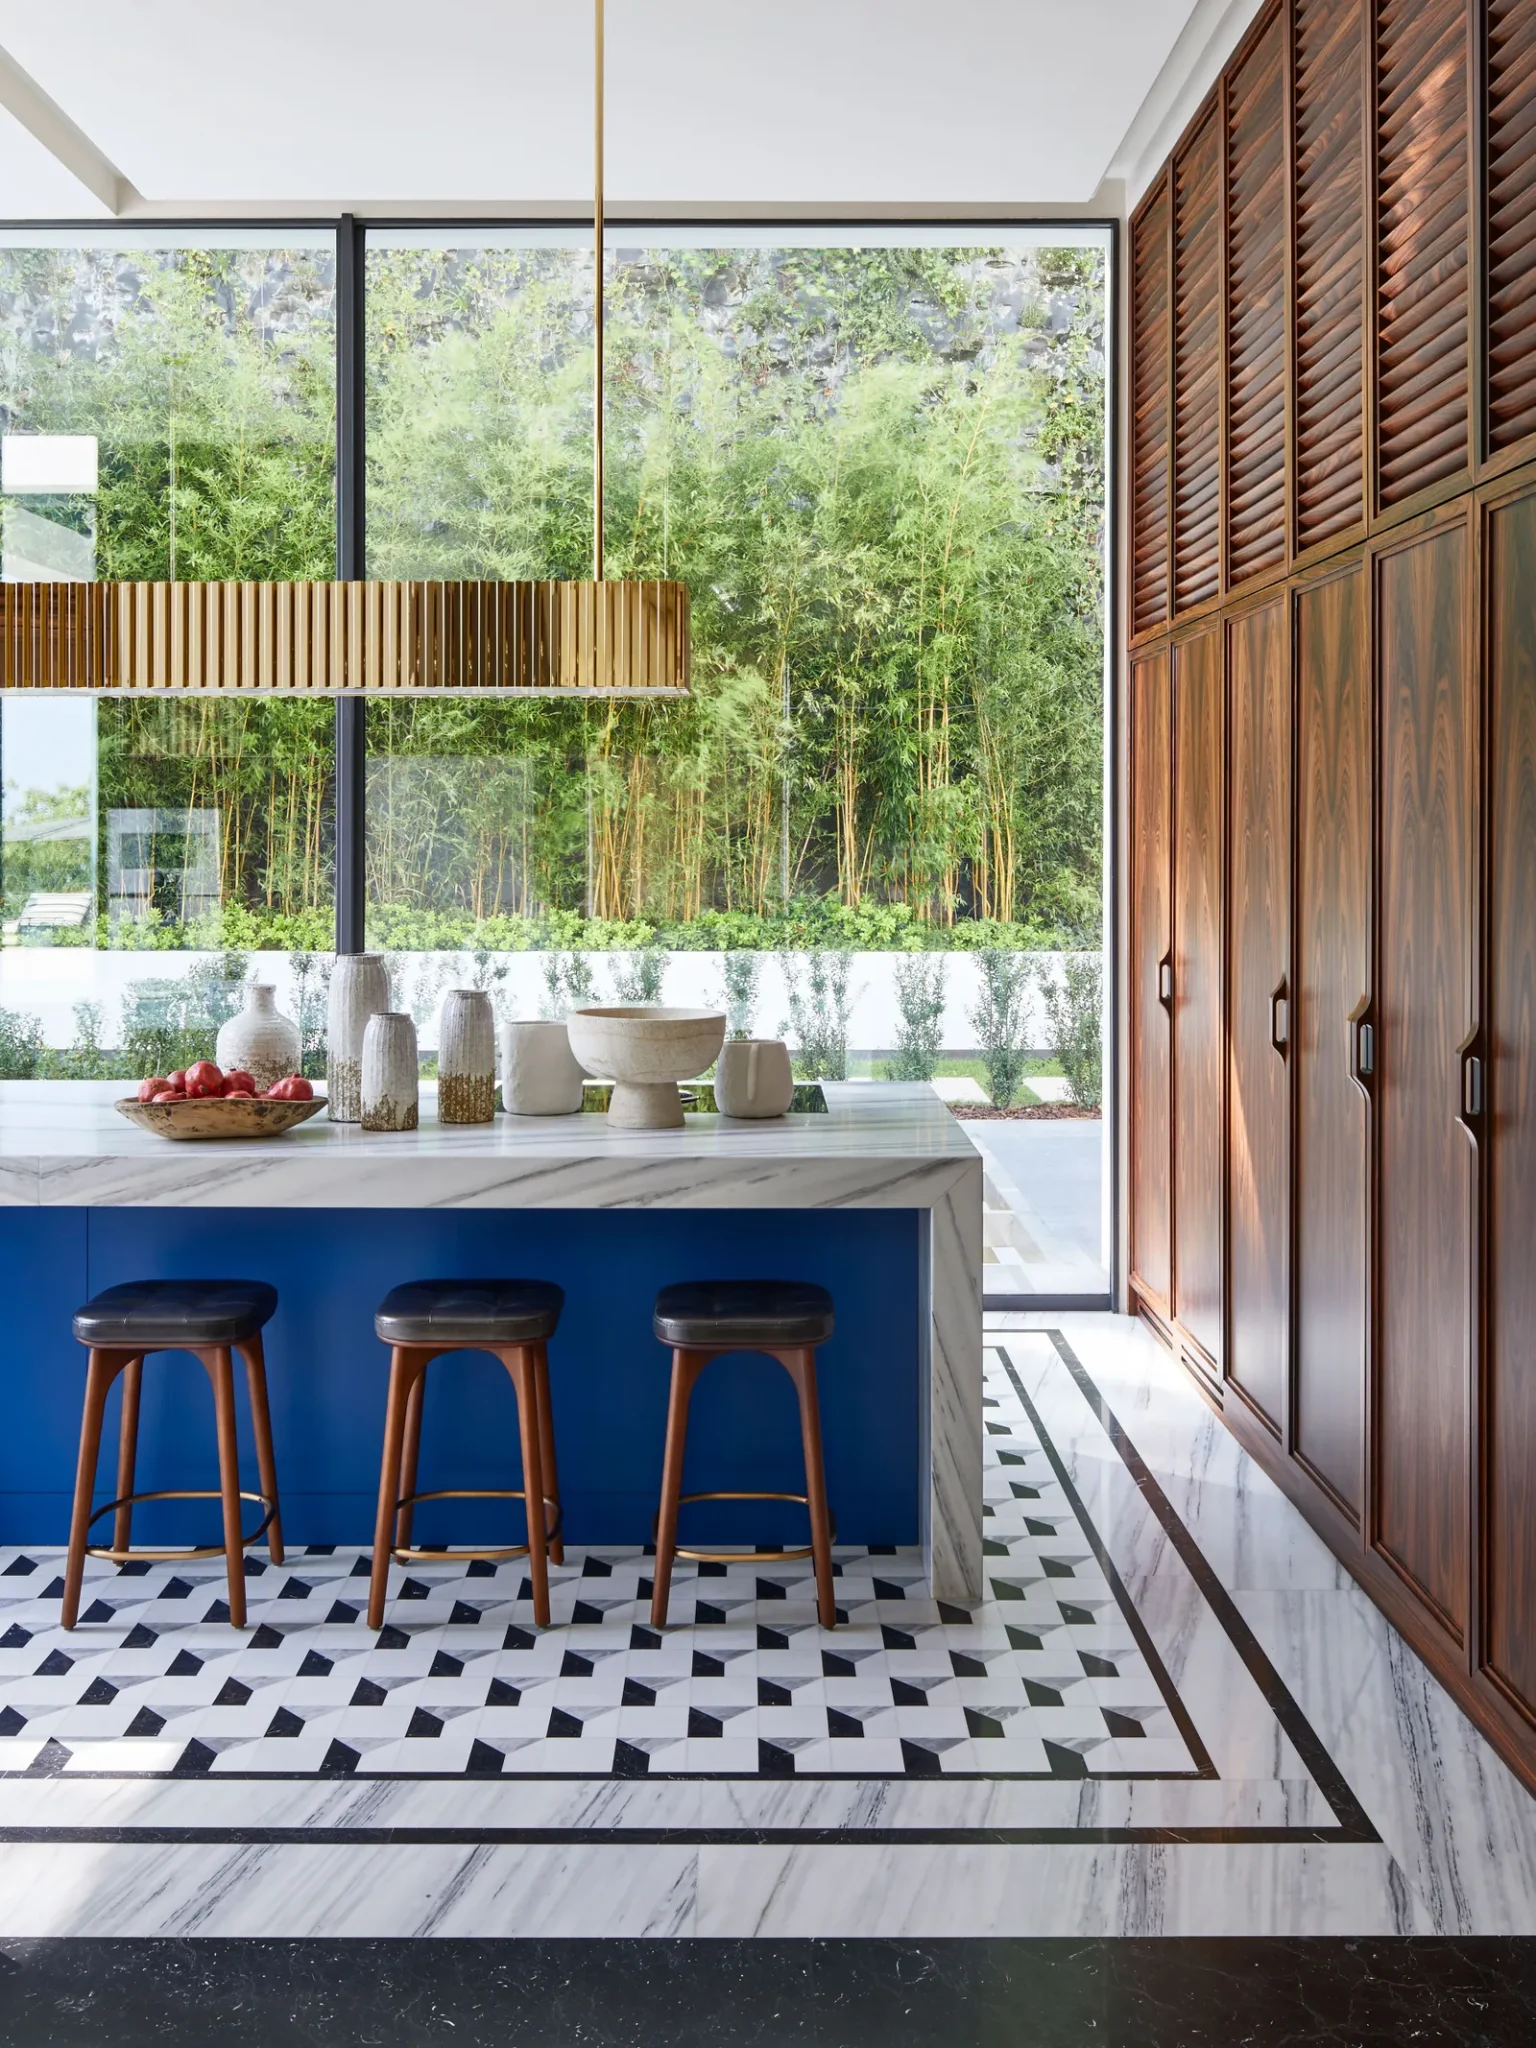 Kitchen featuring an exquisite patterned flooring and a marble kitchen island with blue wood on the sides